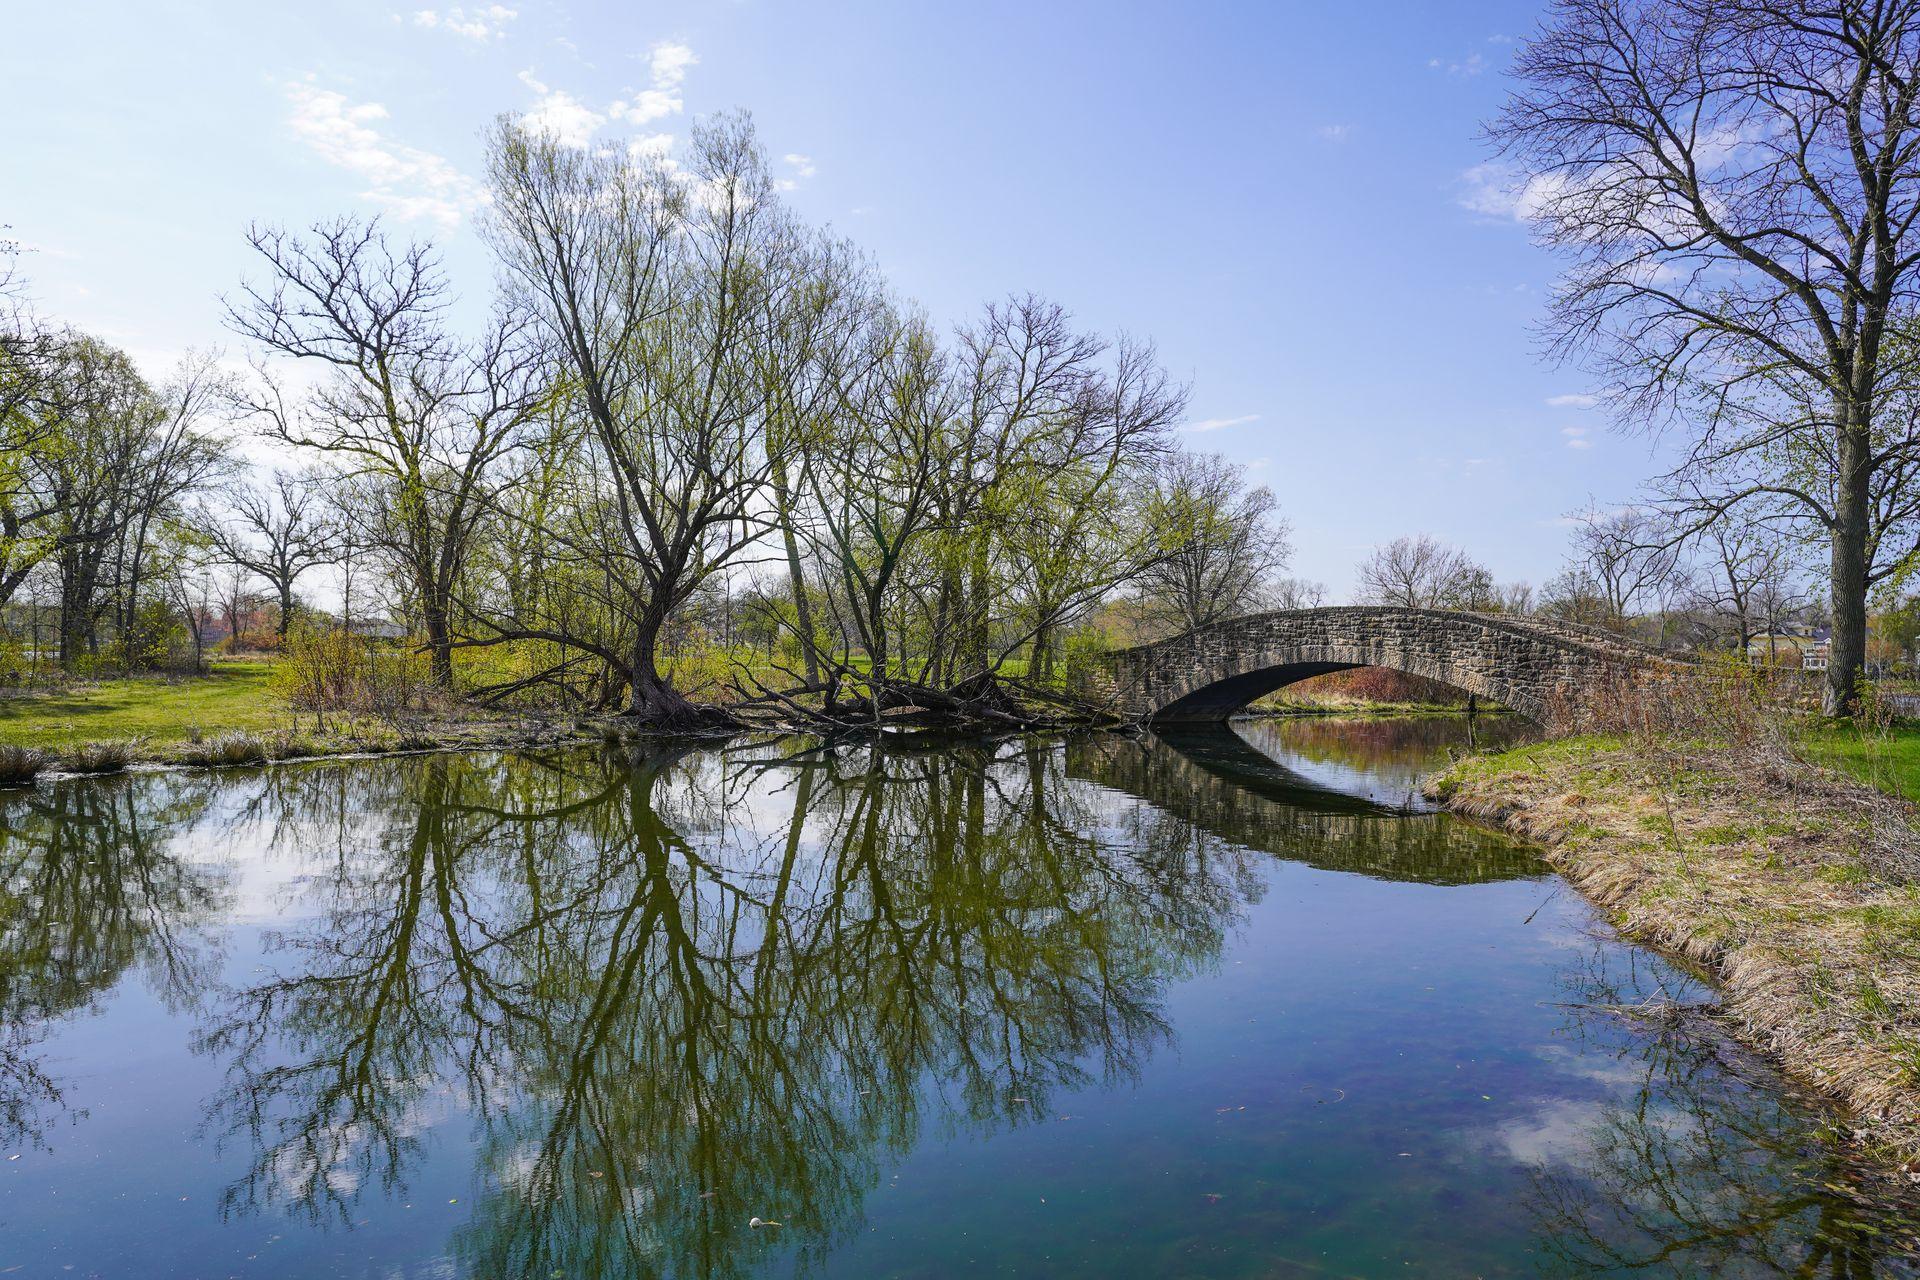 A stone bridge crosses over a waterway in Tenney Park. Several trees create a reflection on the water.